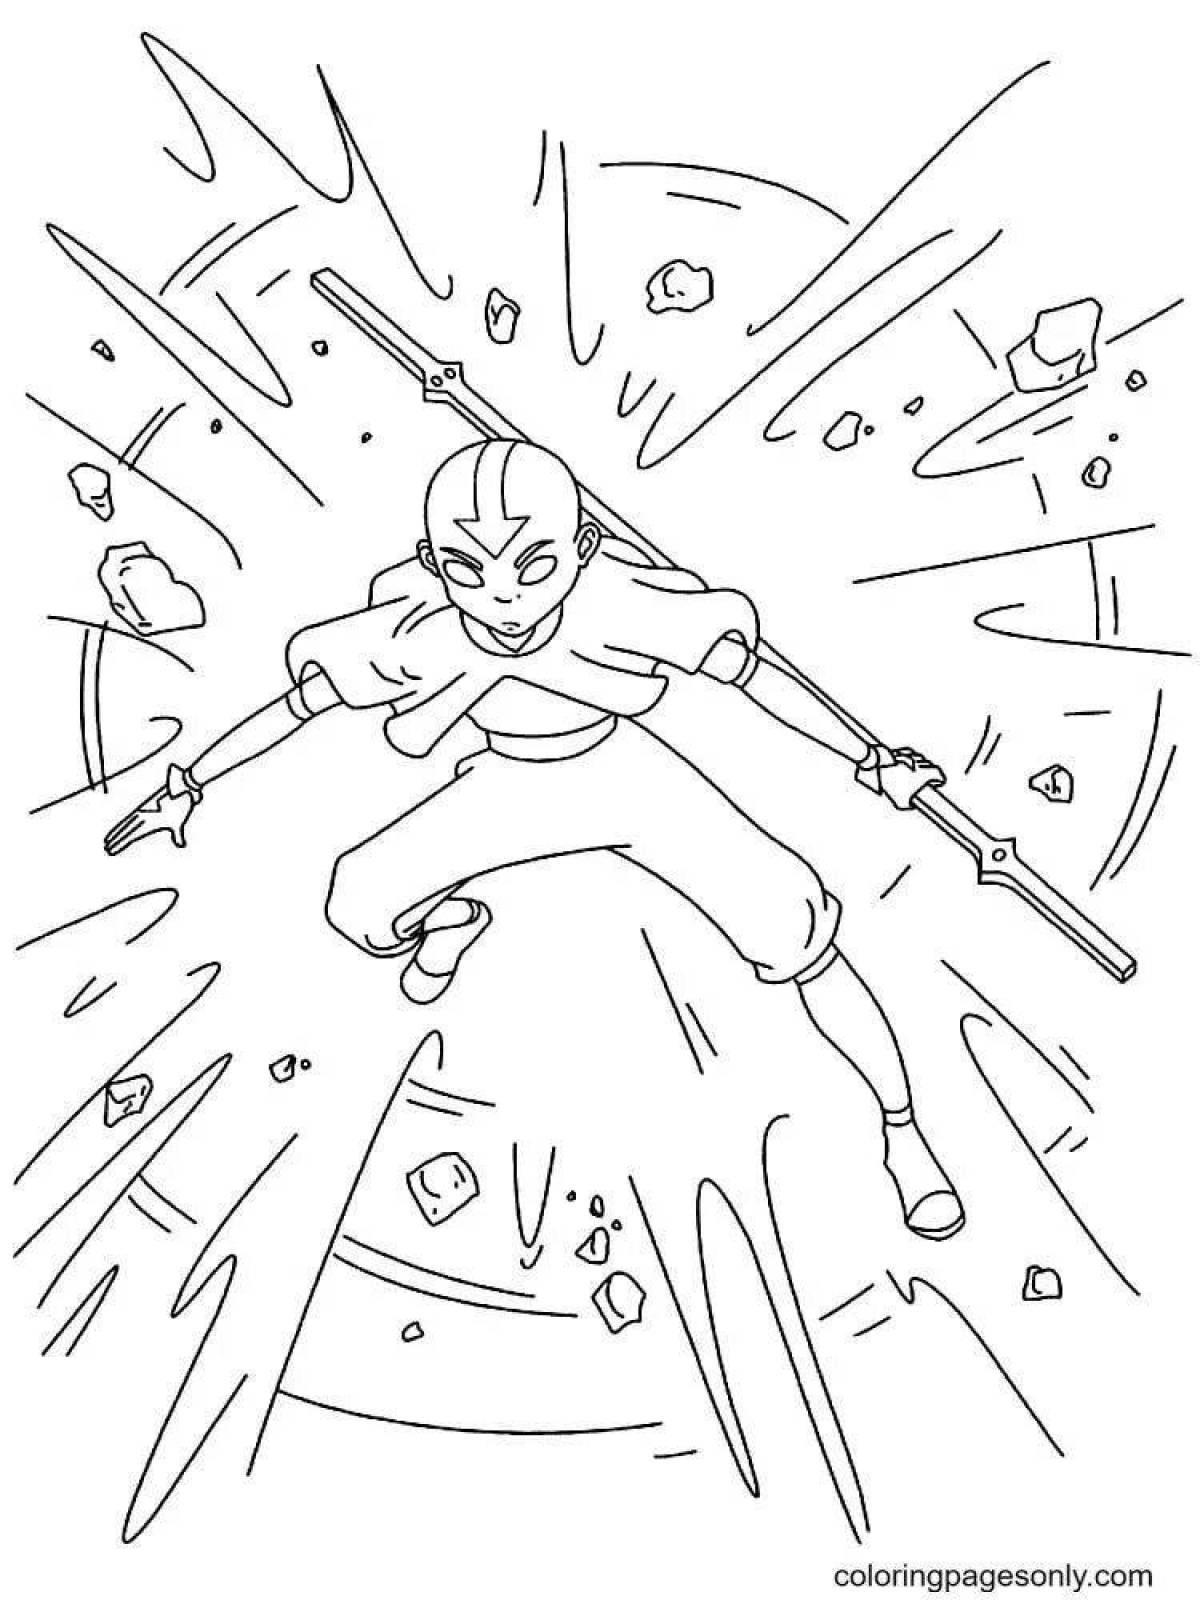 Aang's avatar adorable coloring page